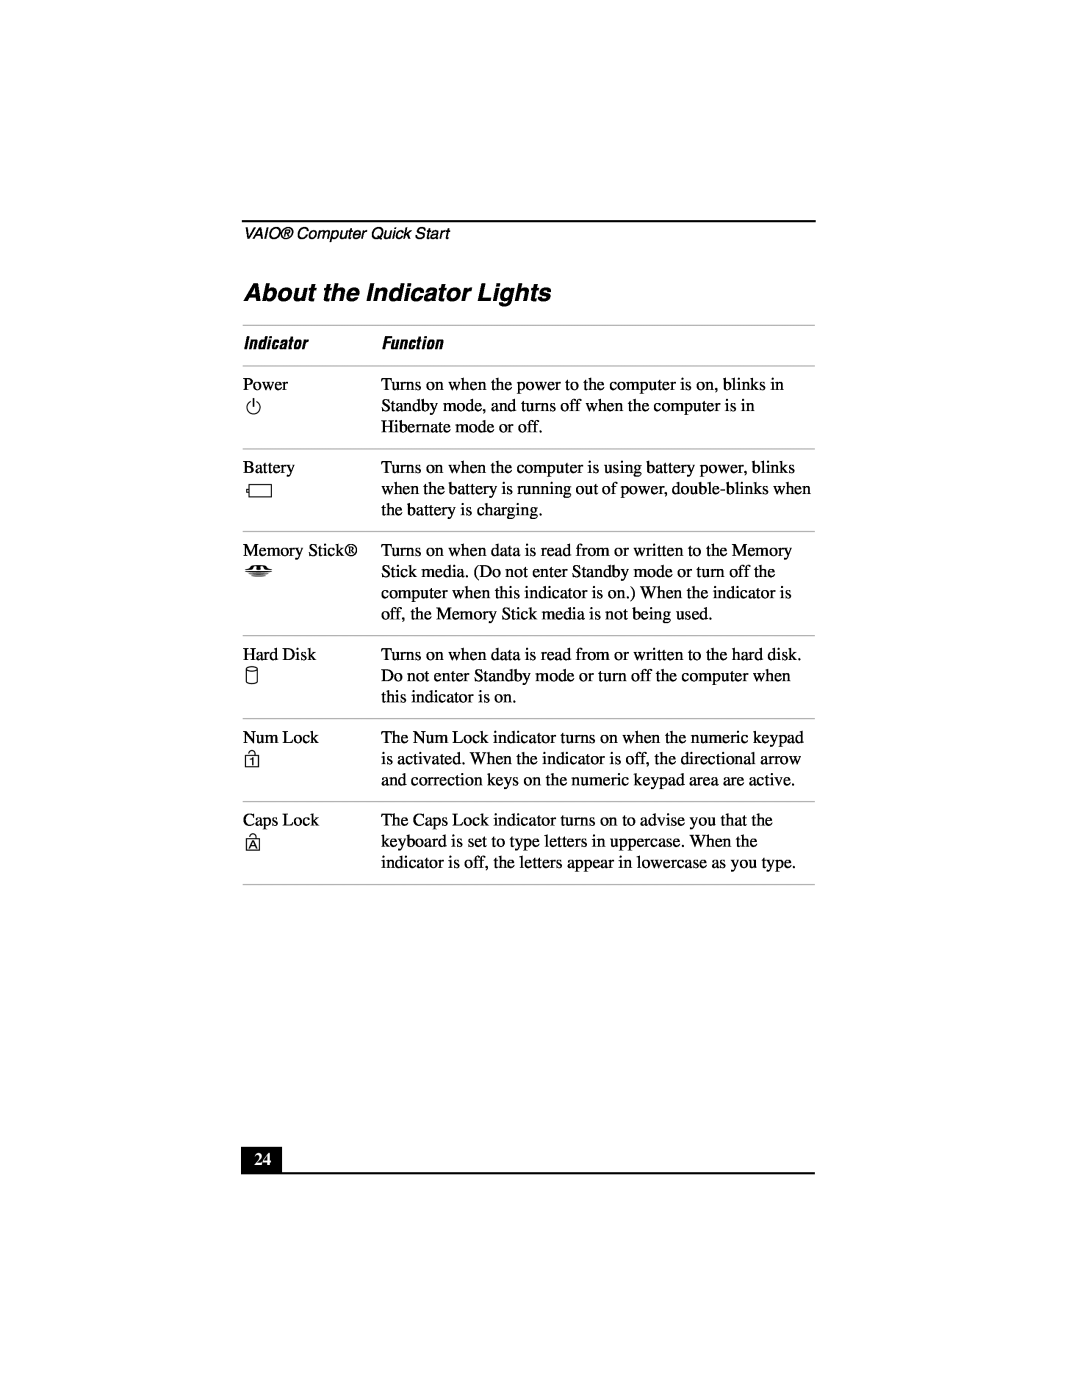 Sony VGN-A600 quick start About the Indicator Lights, Function 